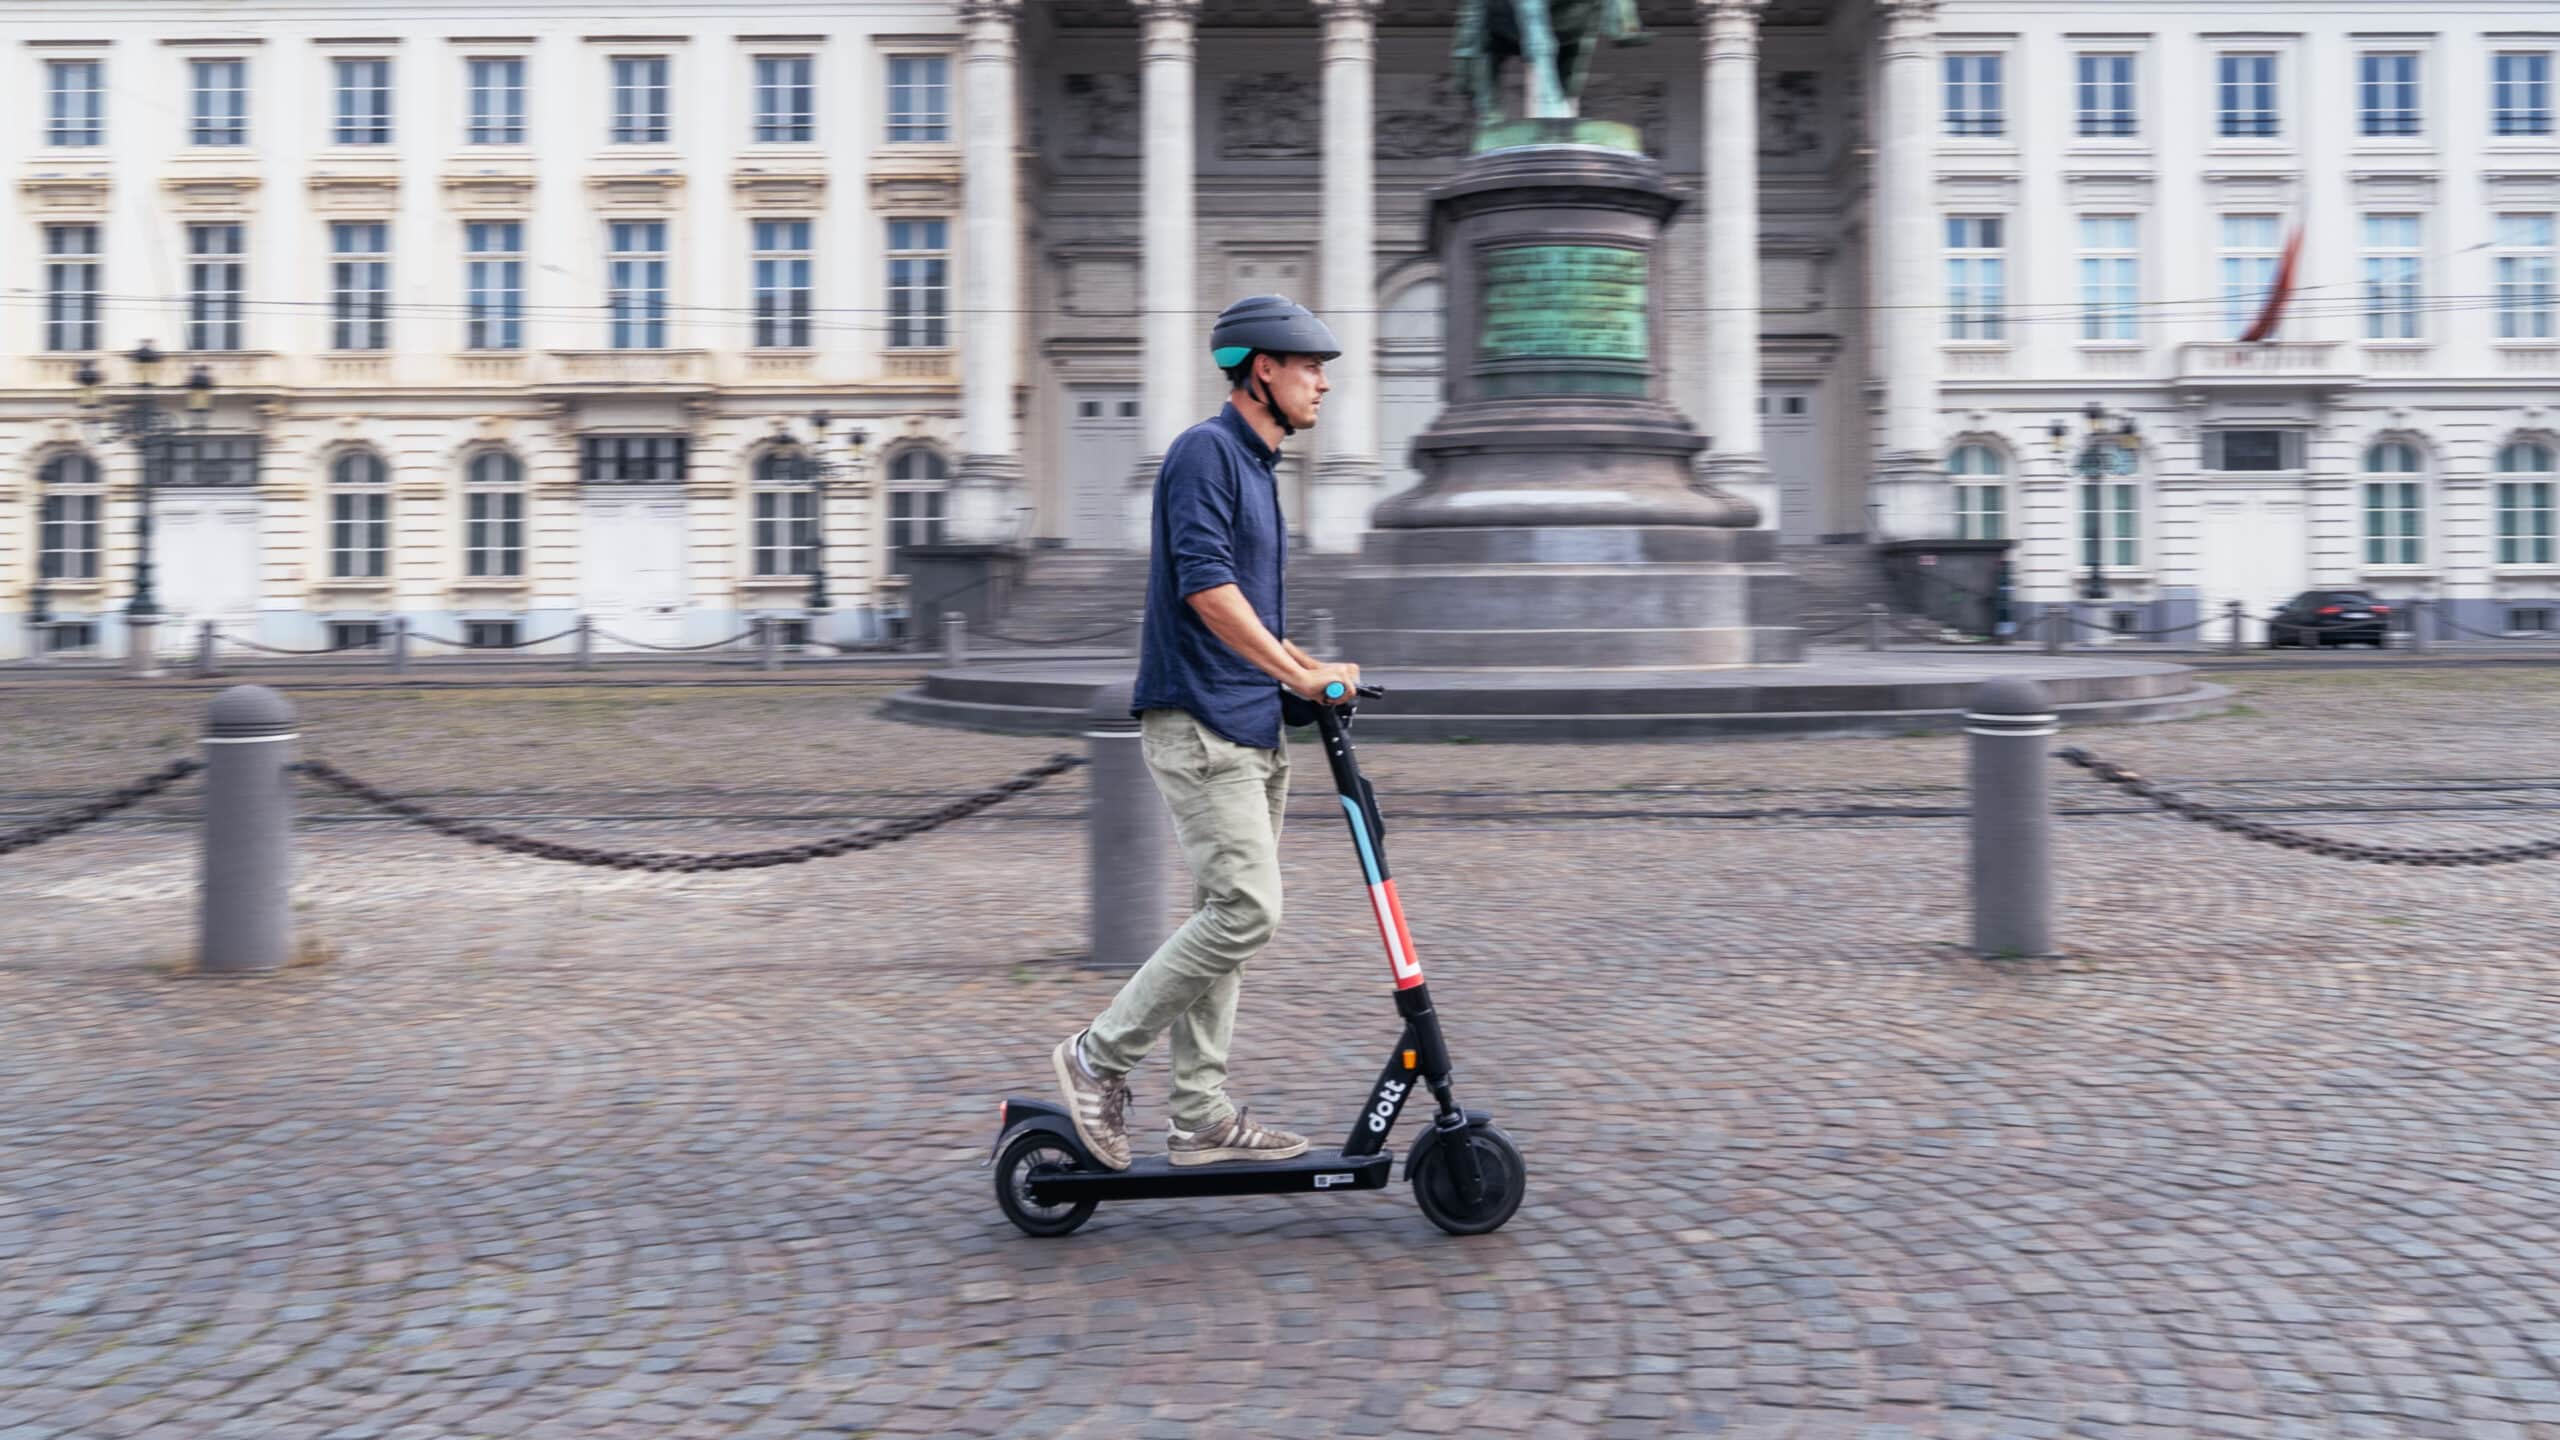 A man riding a scooter with a helmet through a European historic landscape with cobblestone streets.